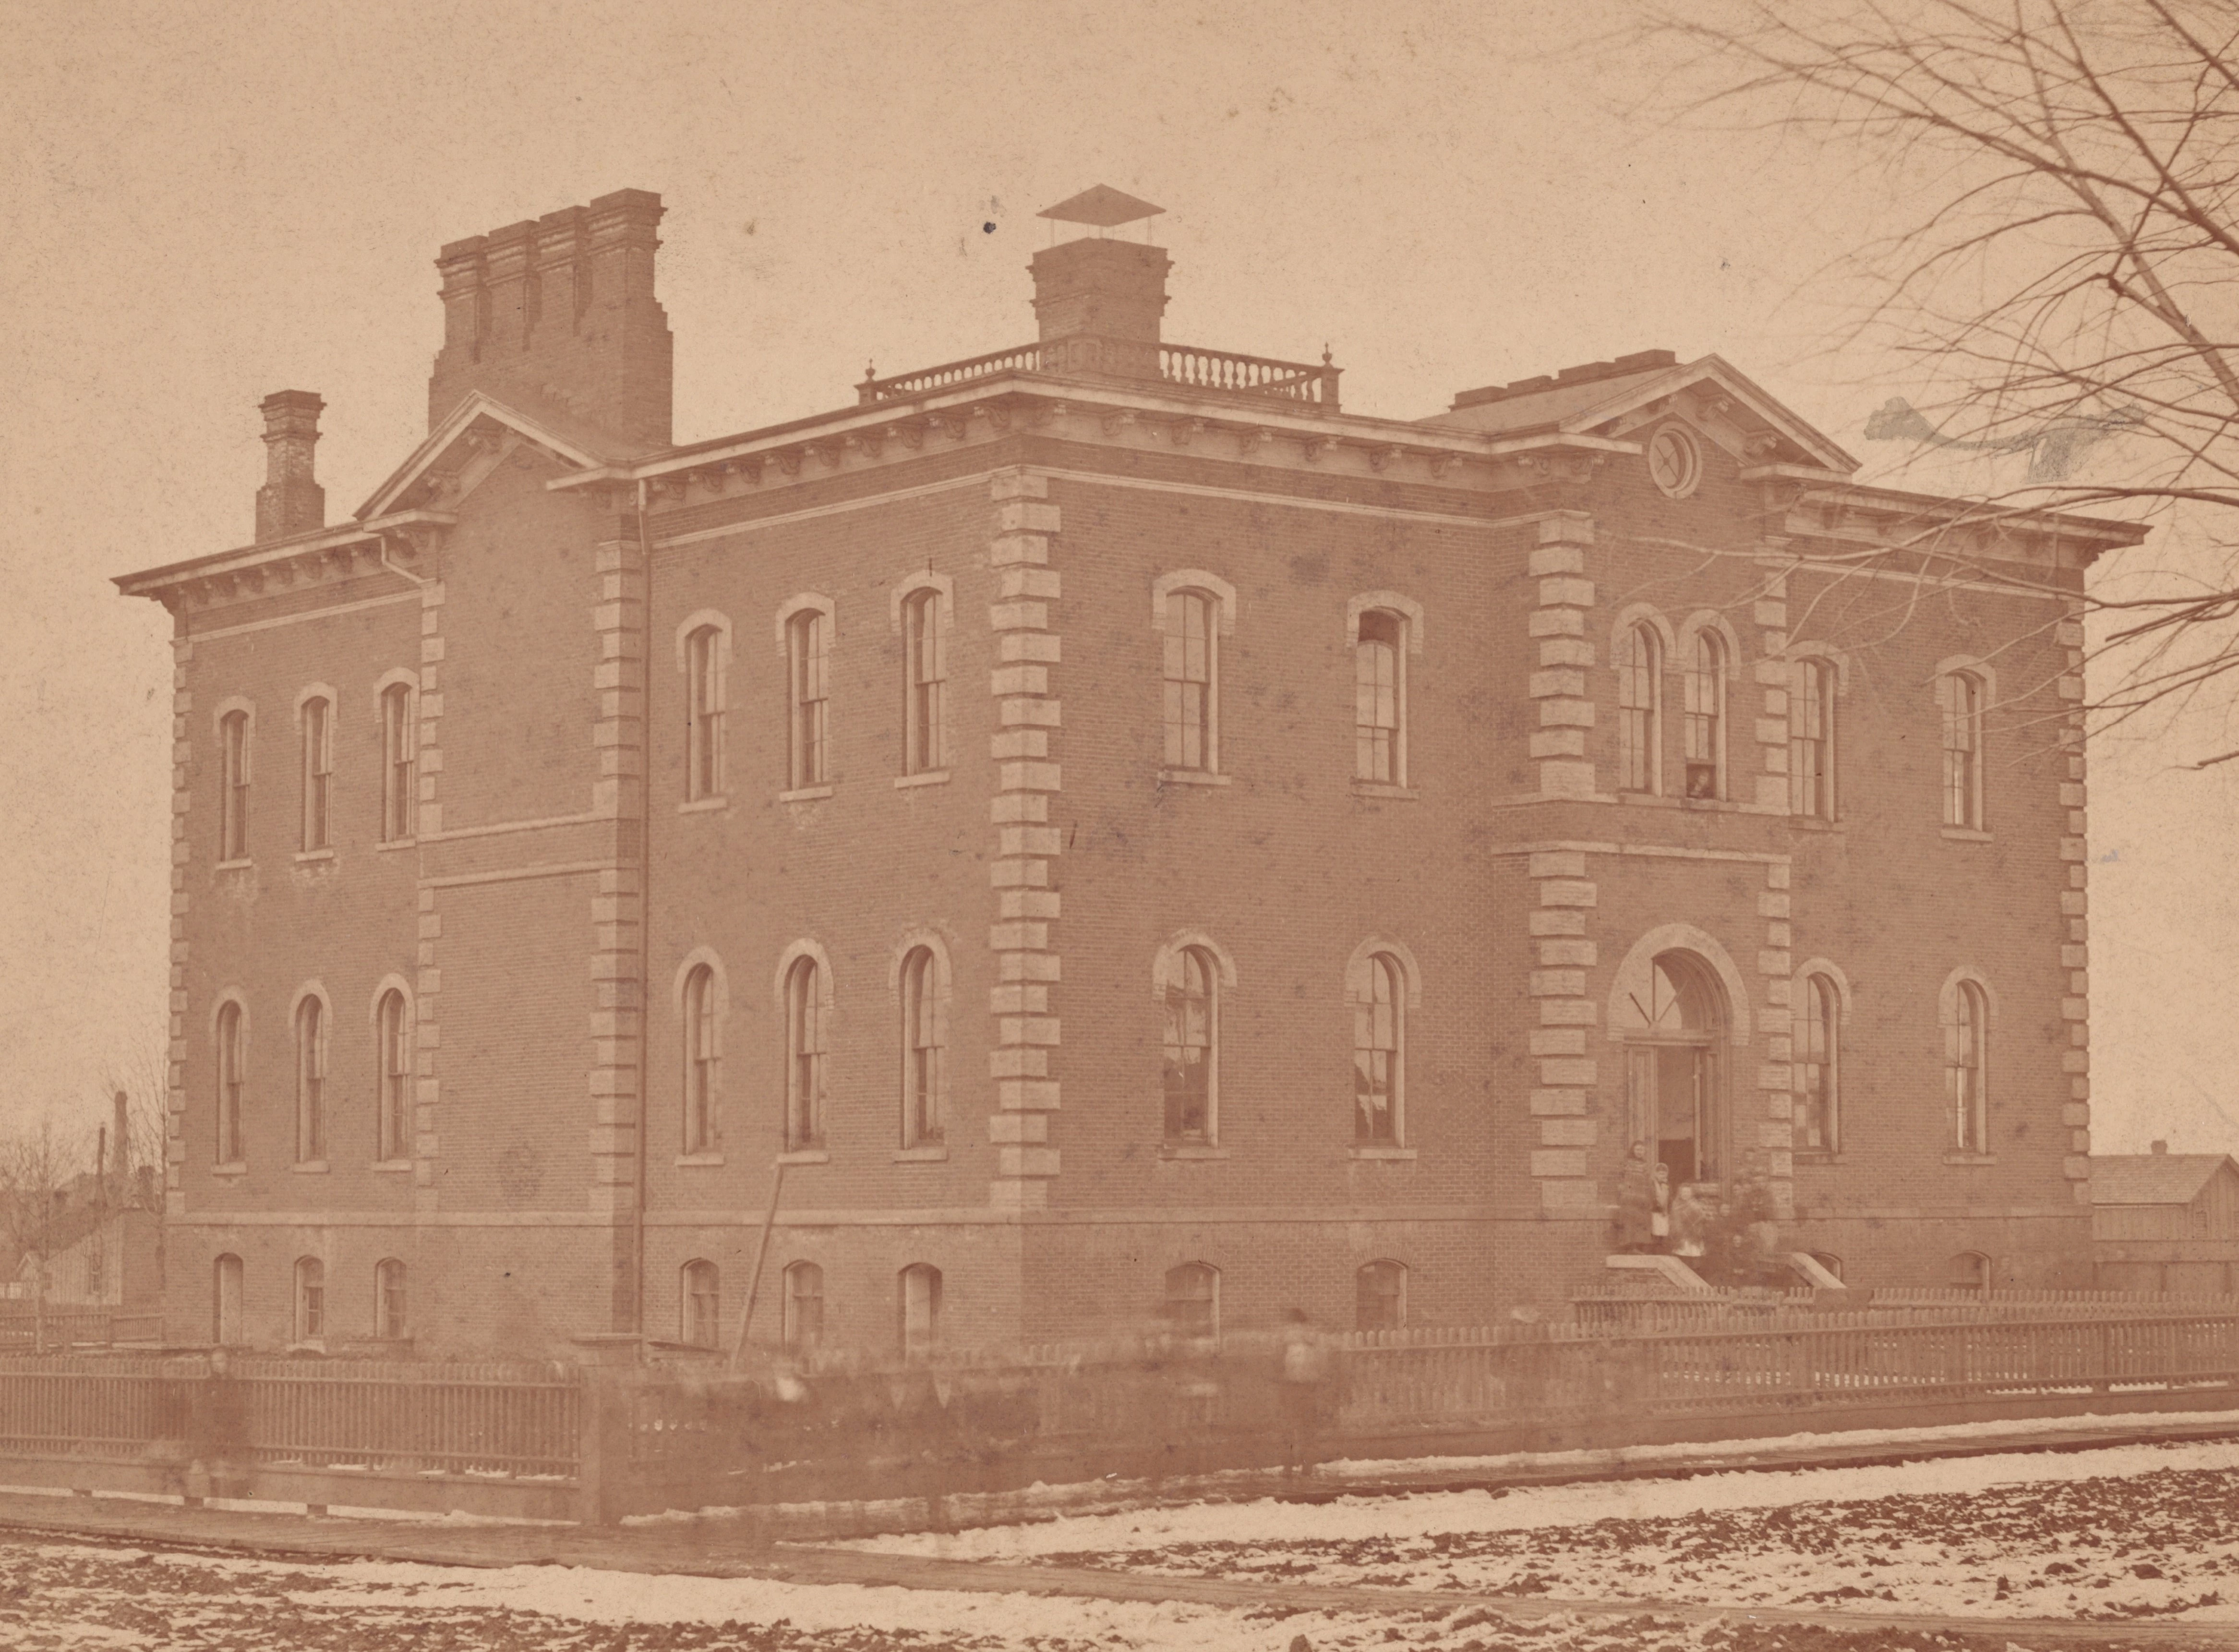 A yellowed image shows a large three-story school made of brick. it has multiple chimneys, and a fence around the perimeter of the grounds. Blurred human figures can be seen on the sidewalk, they are moving and come across as translucent in this image. A few branches of a tree can be see on the right, they are completely bare. A small amount of snow appears to be on the ground.